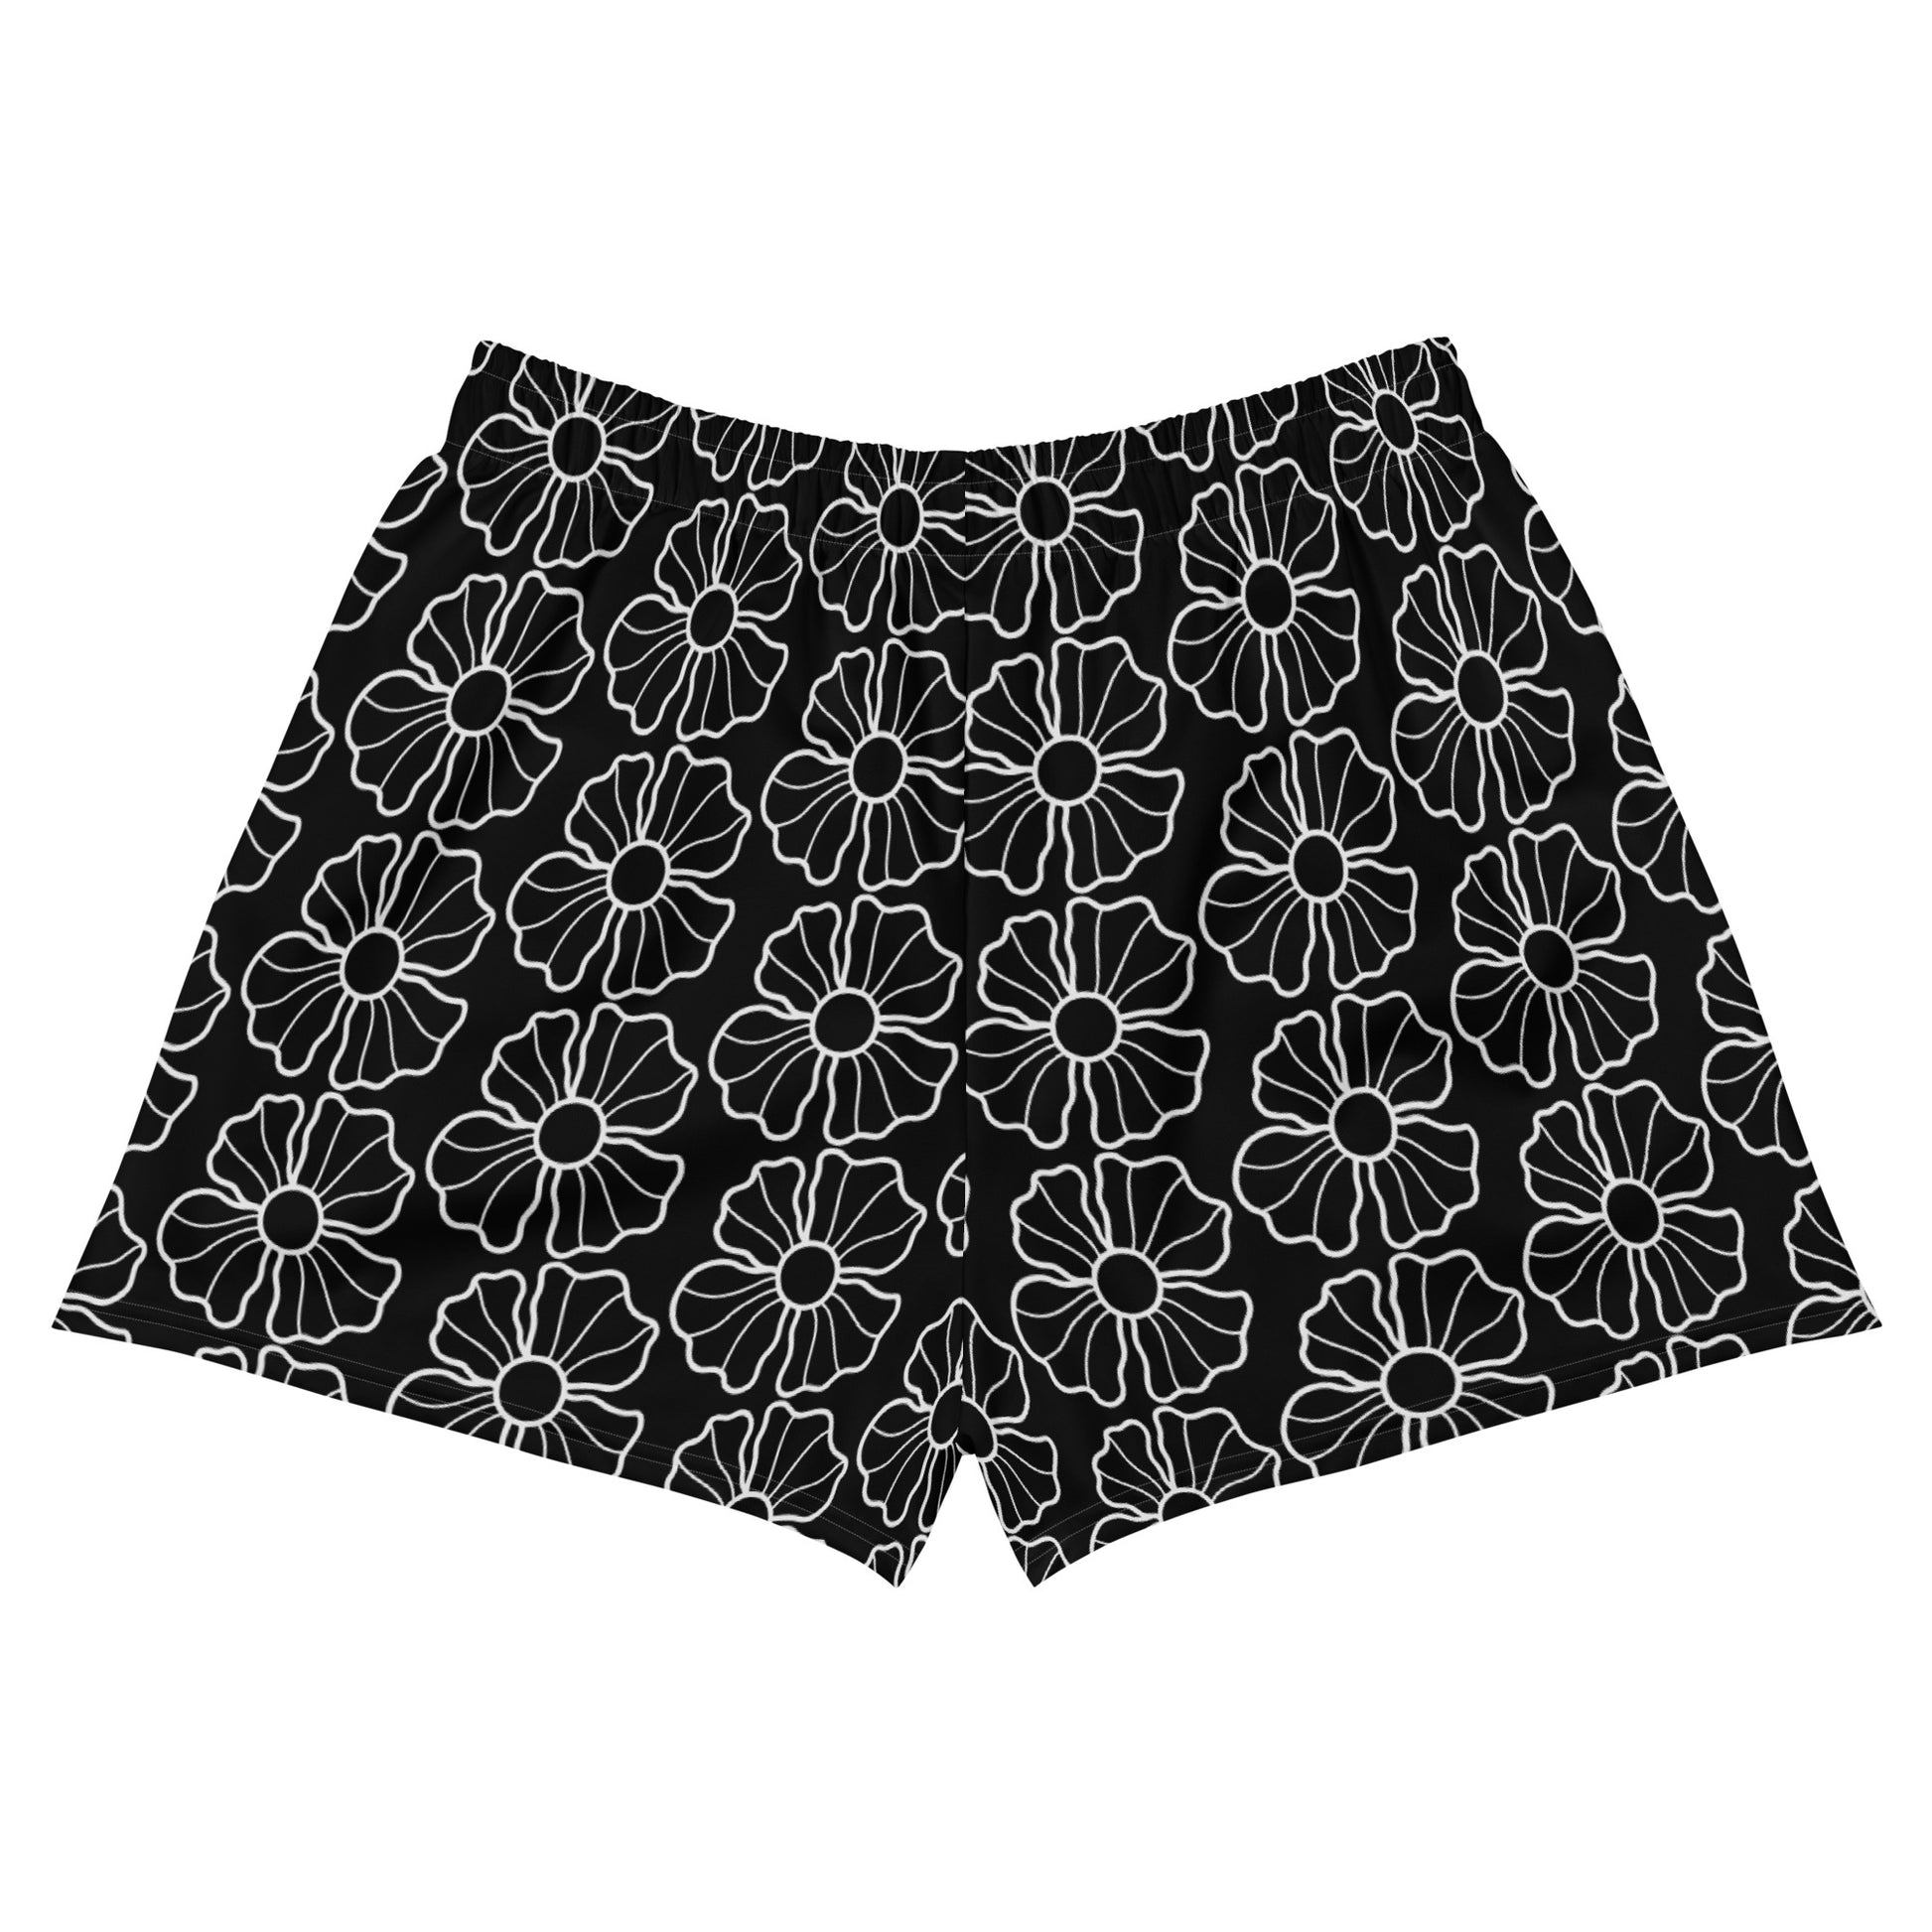 Floral Pattern Black and White Women's Recycled Athletic Shorts